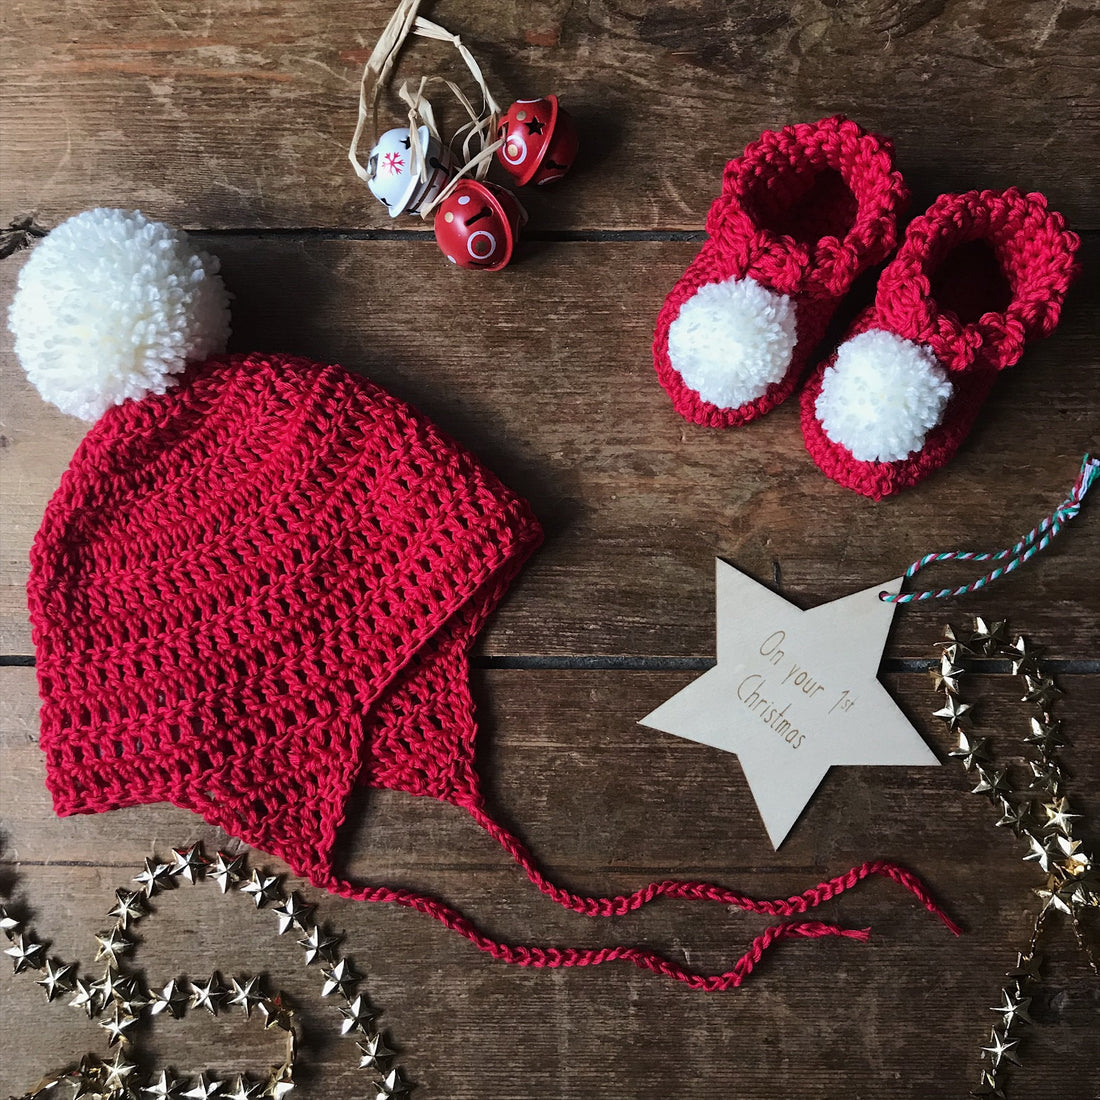 Small business Christmas gift guide